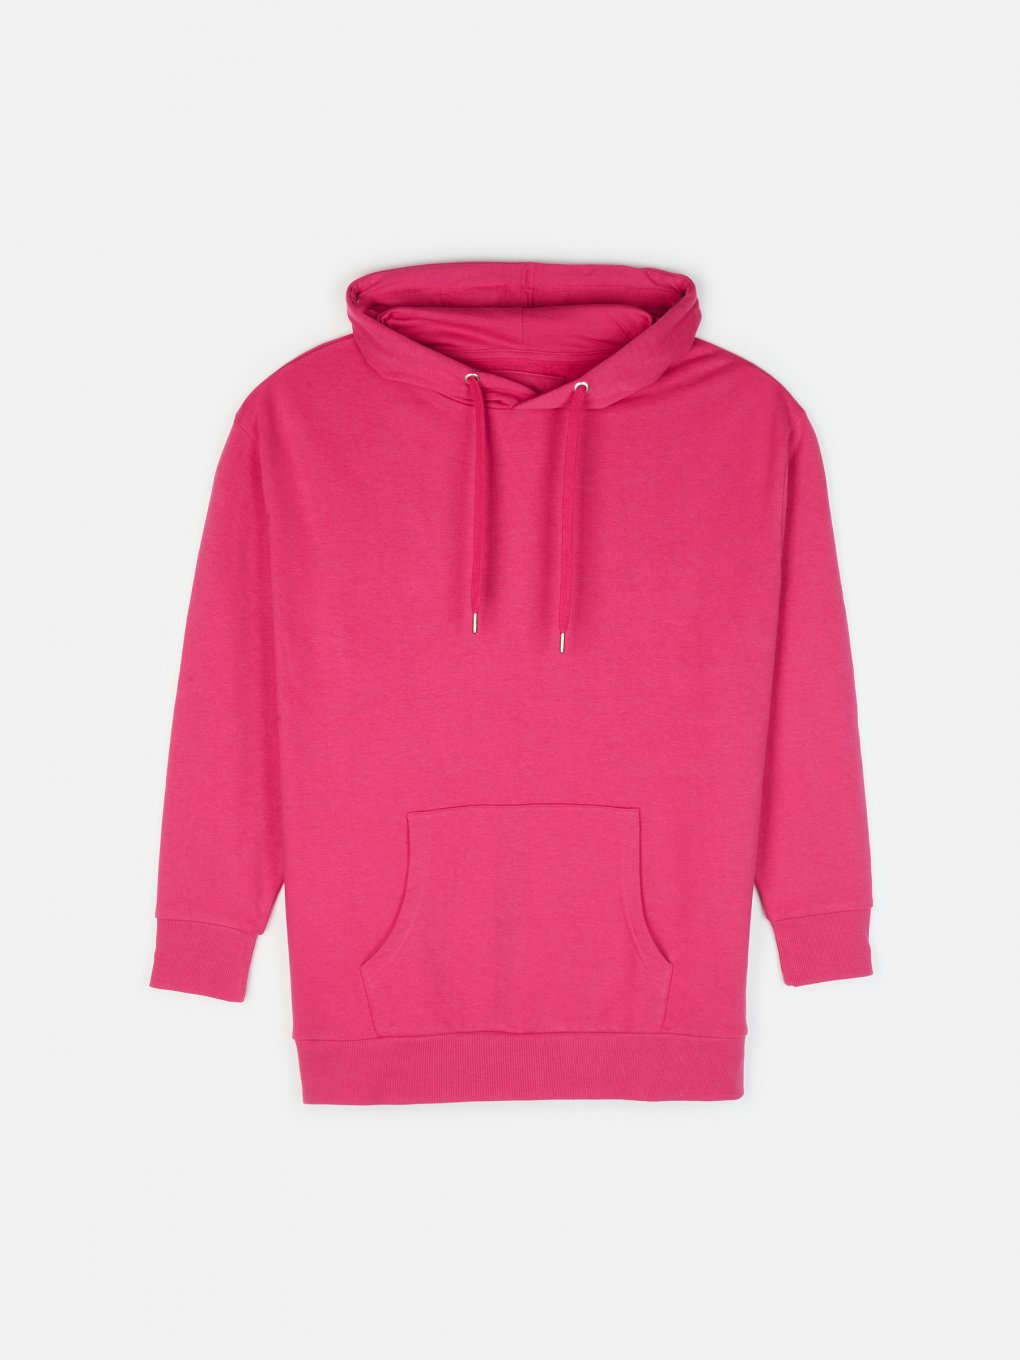 Hoodie with print on back